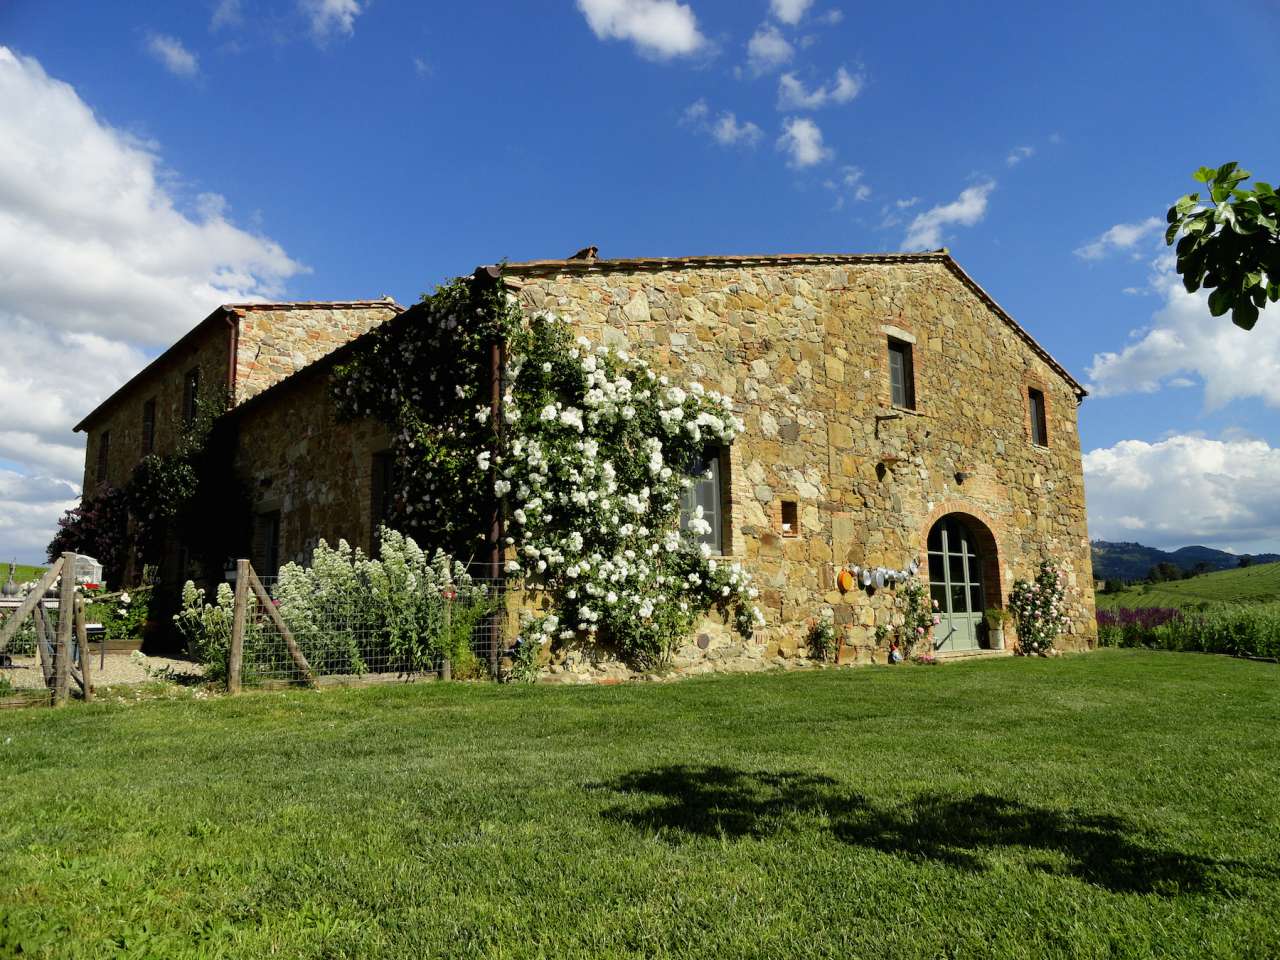 Villa for sale near the medieval town of Montepulciano, Tuscany